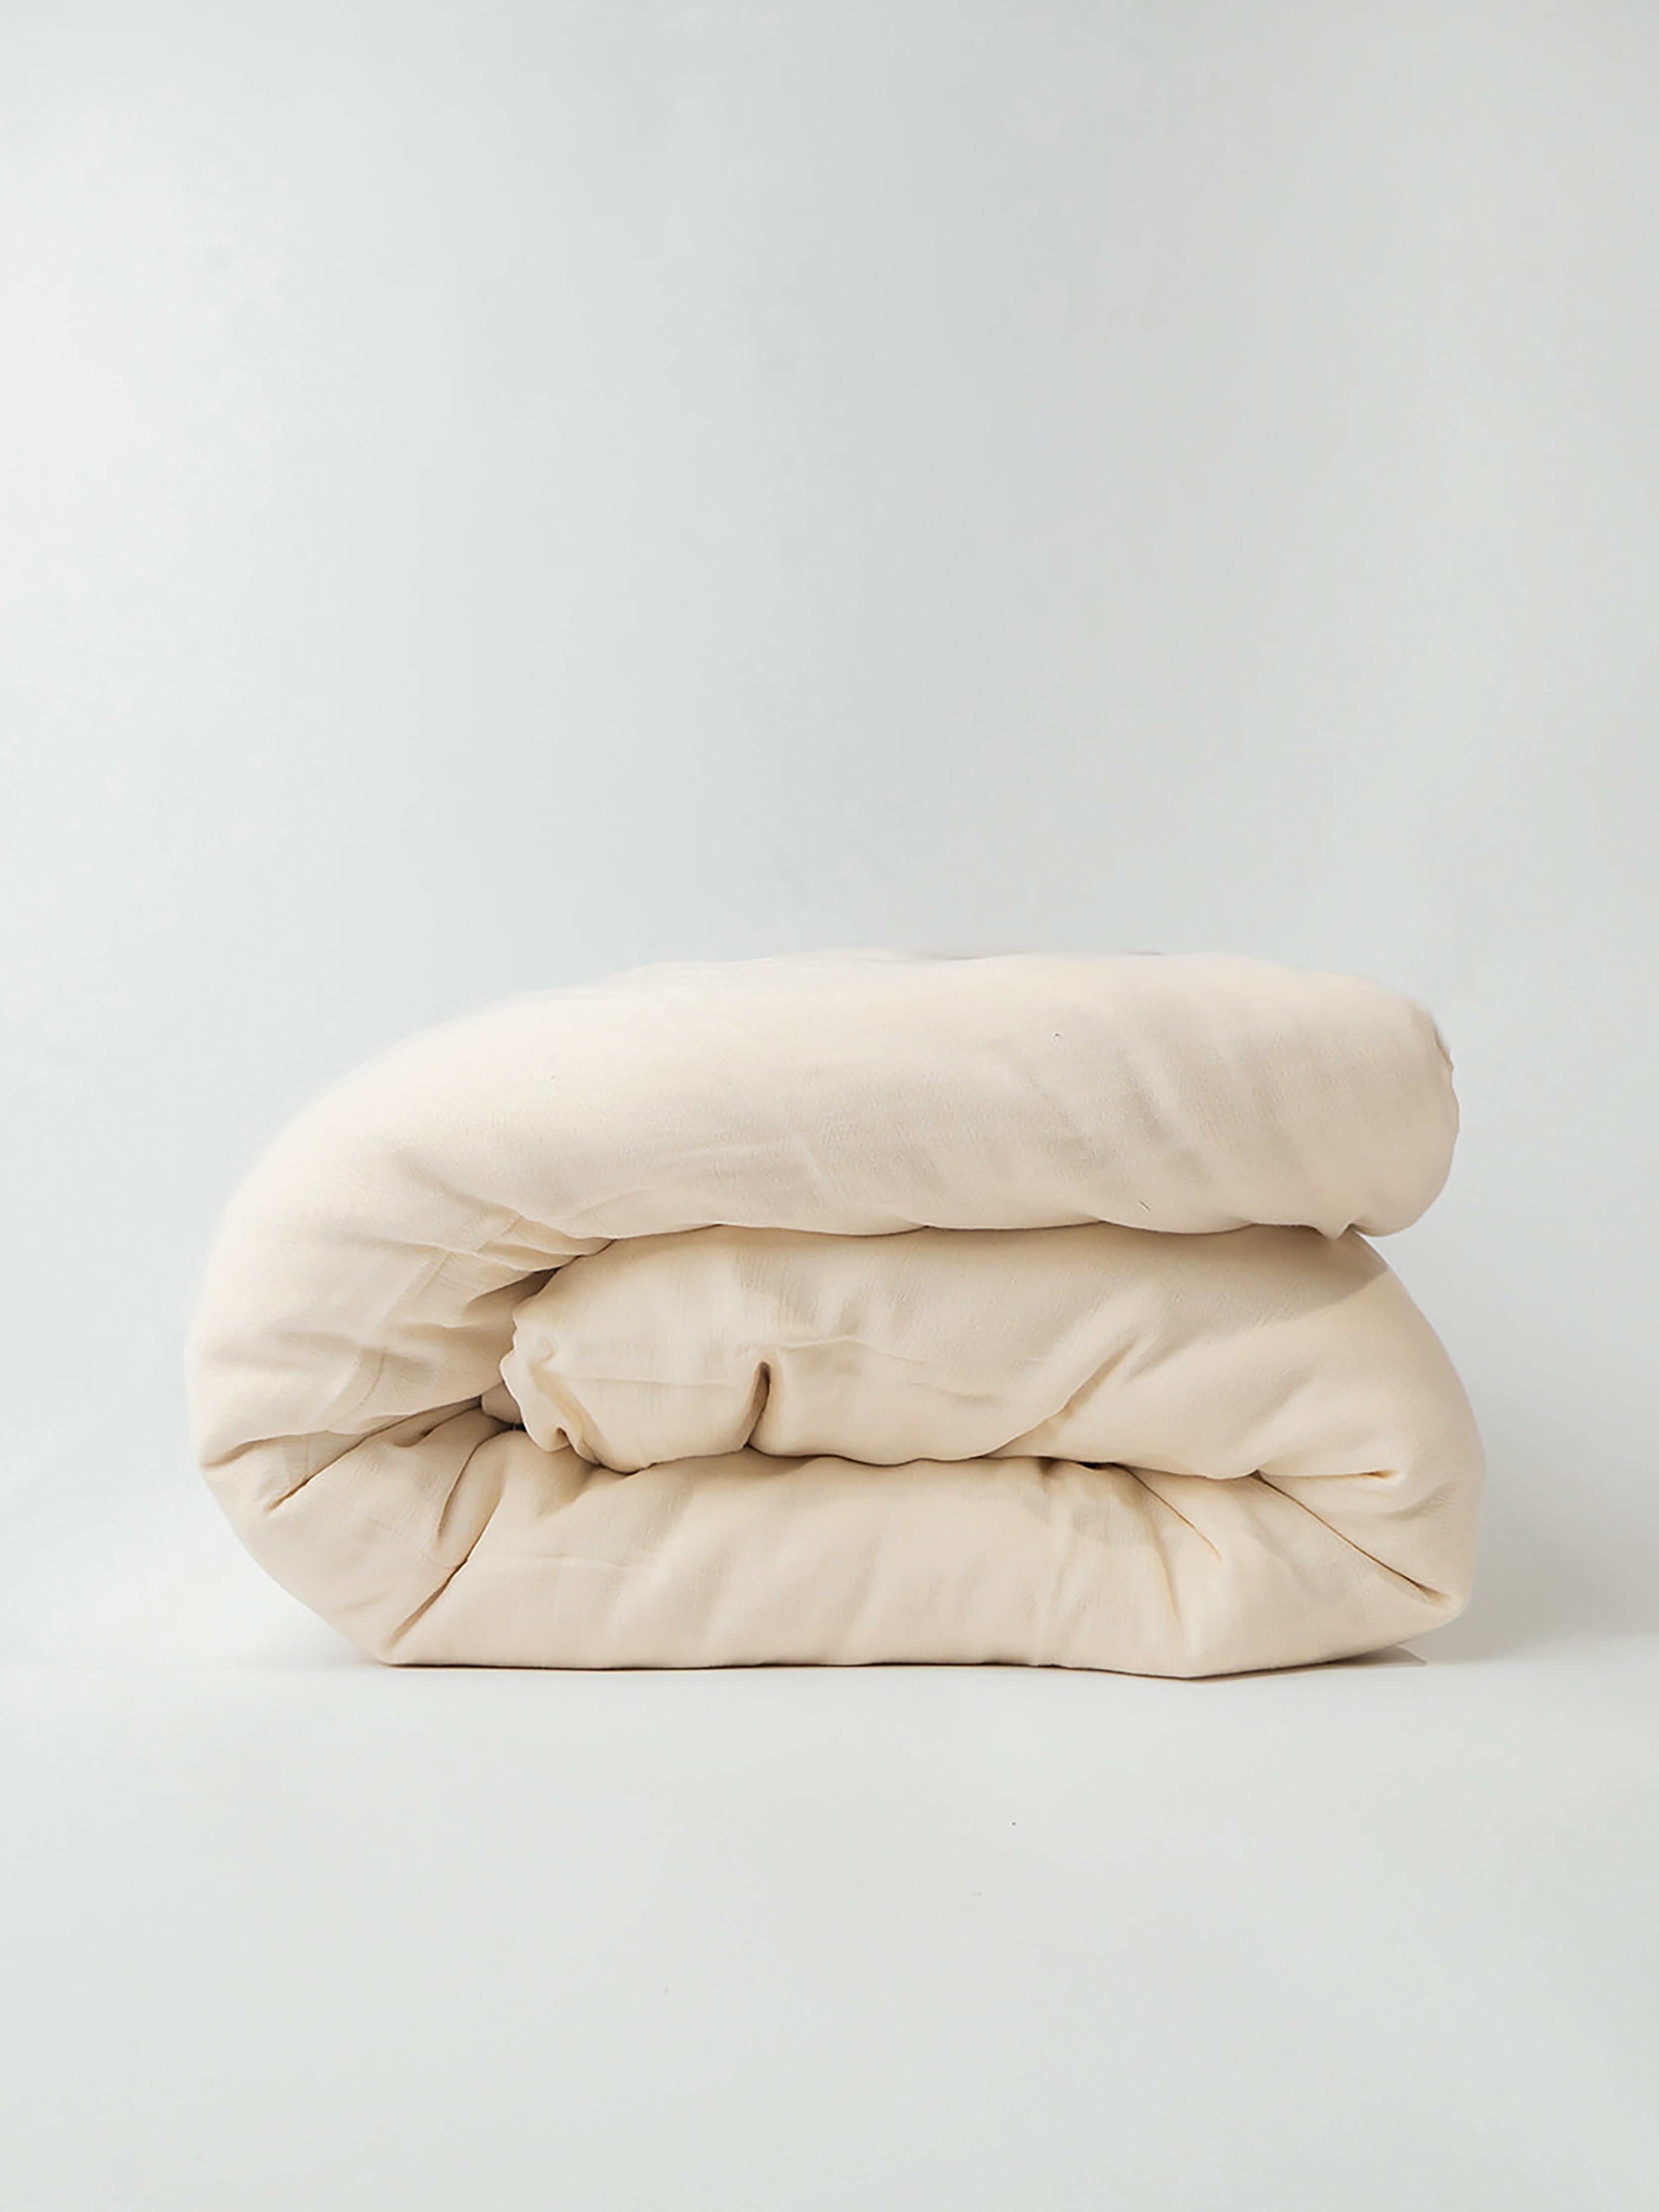 Buttermilk Aire Bamboo Duvet Cover. The Duvet Cover has been photographed with a white background.|Color:Buttermilk